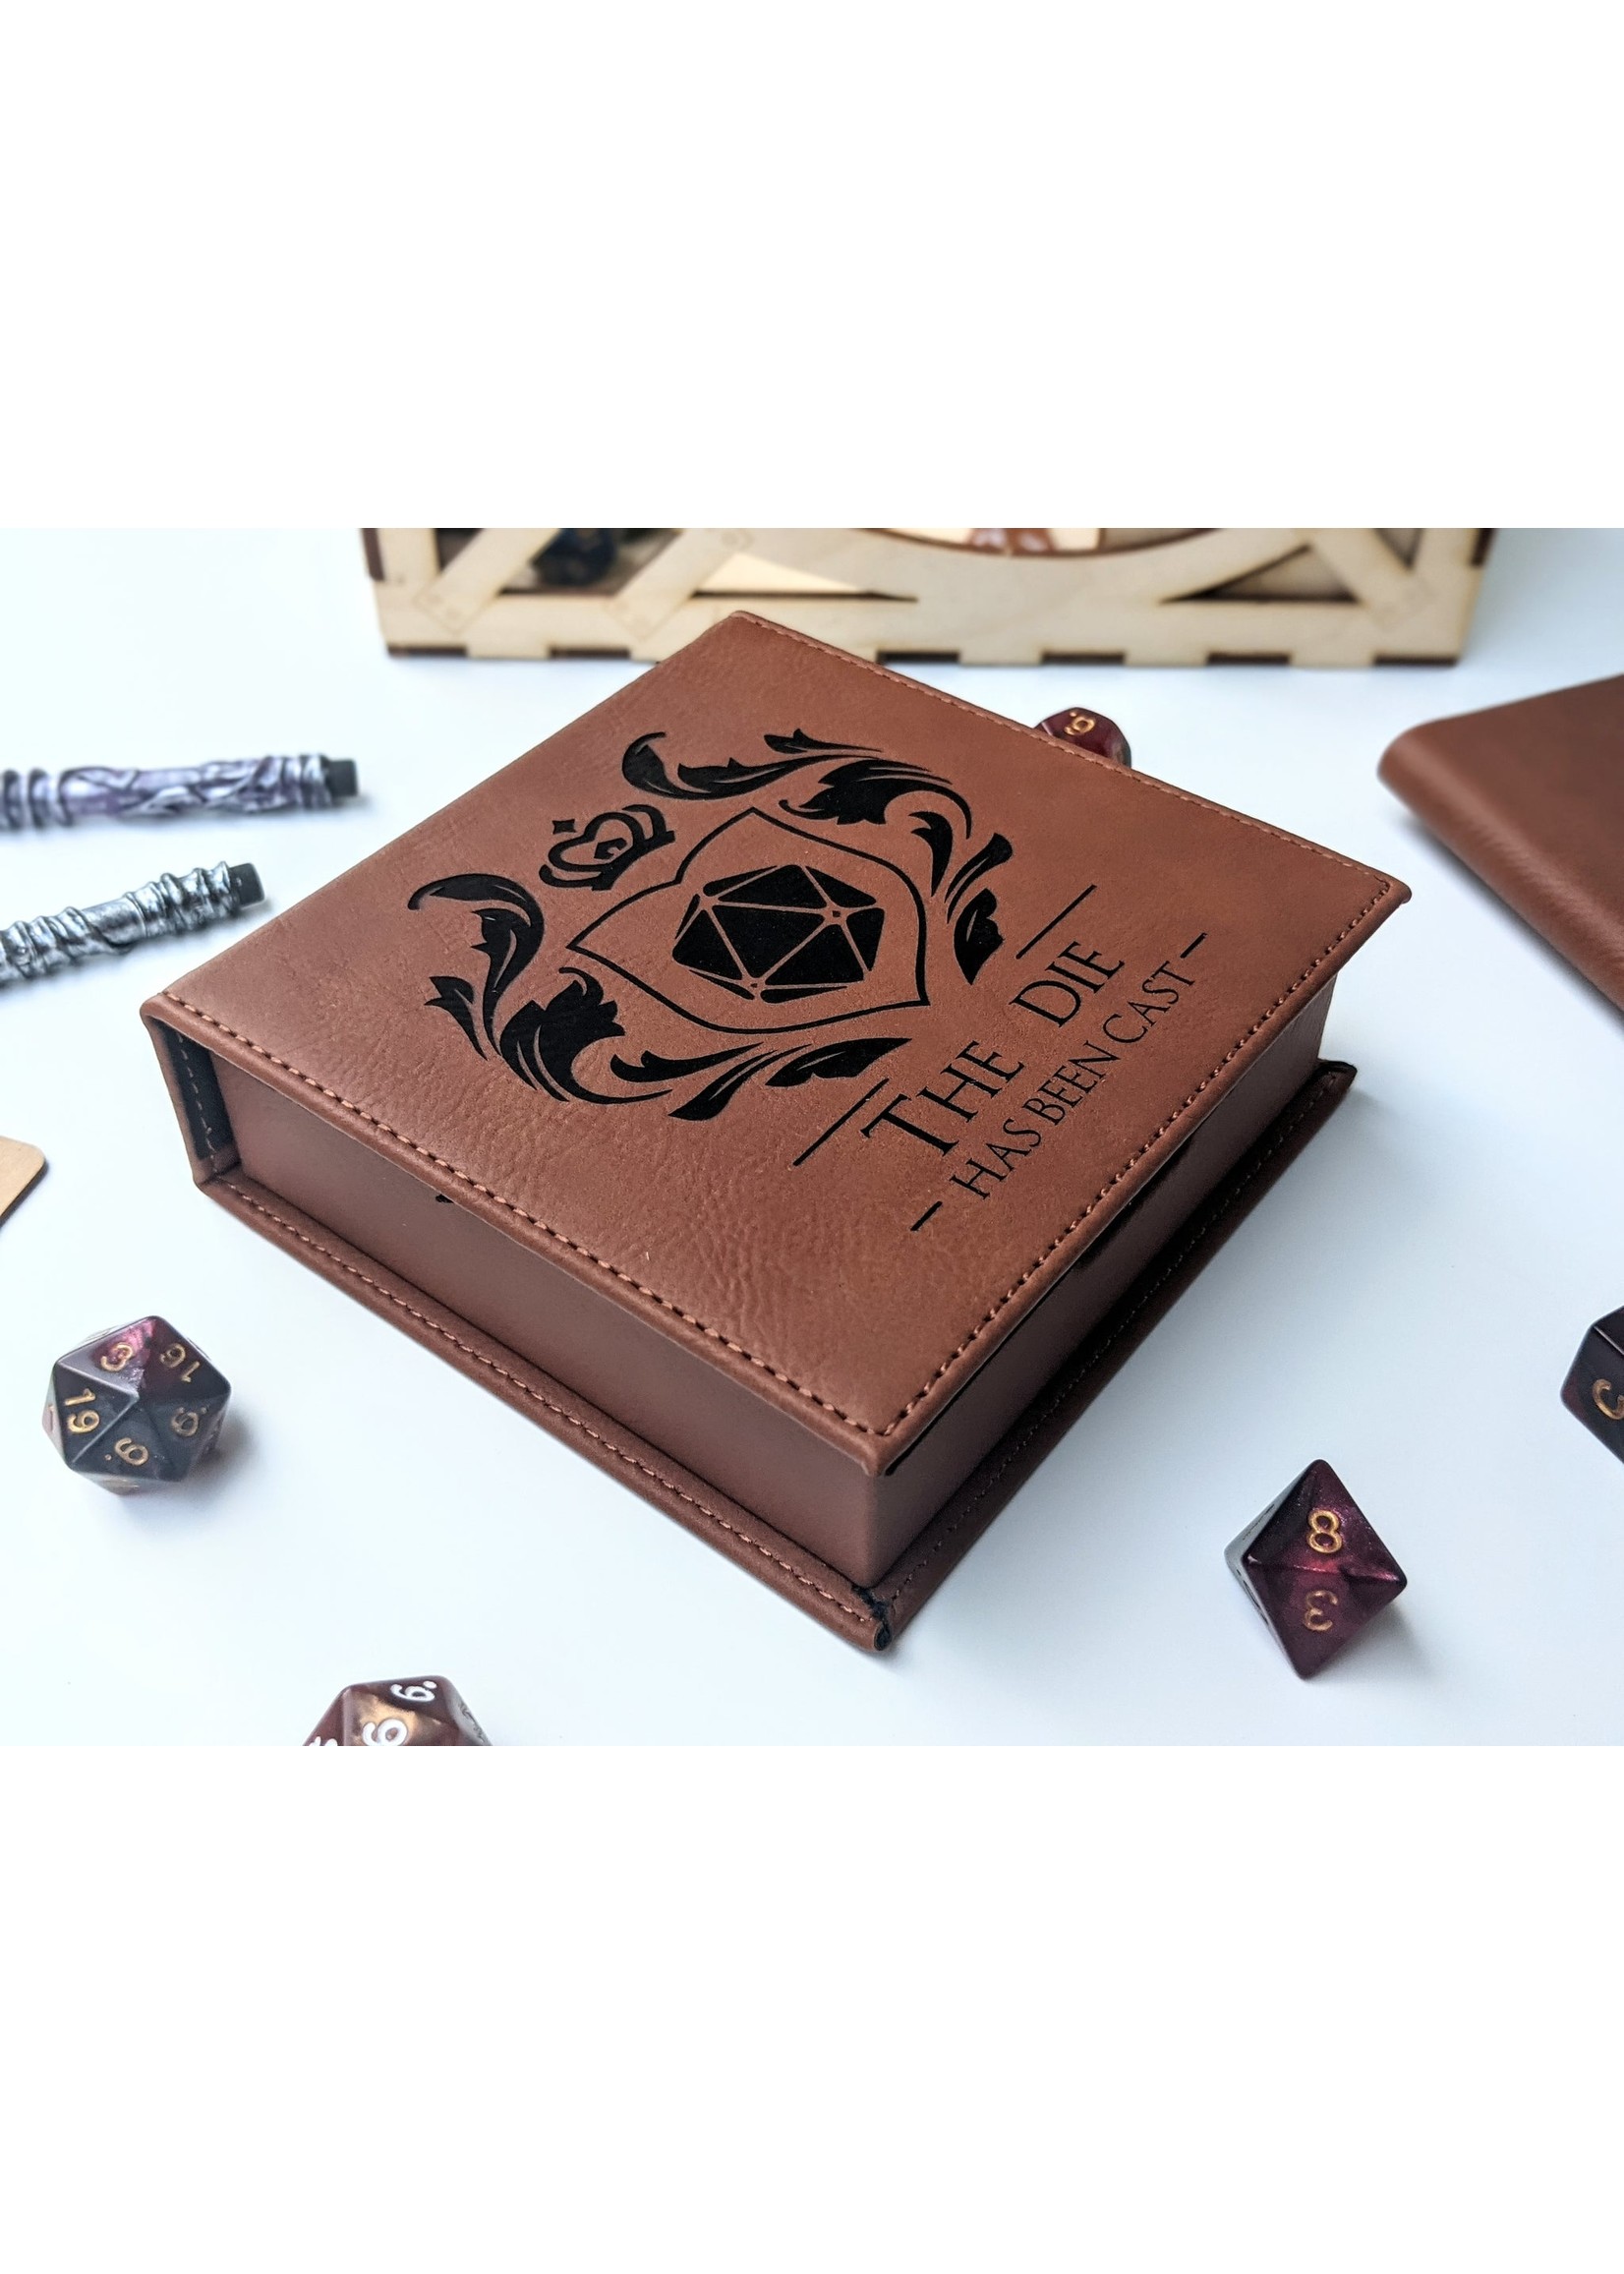 The Die Has Been Cast (Vegan Leather - Chestnut) Dice Box